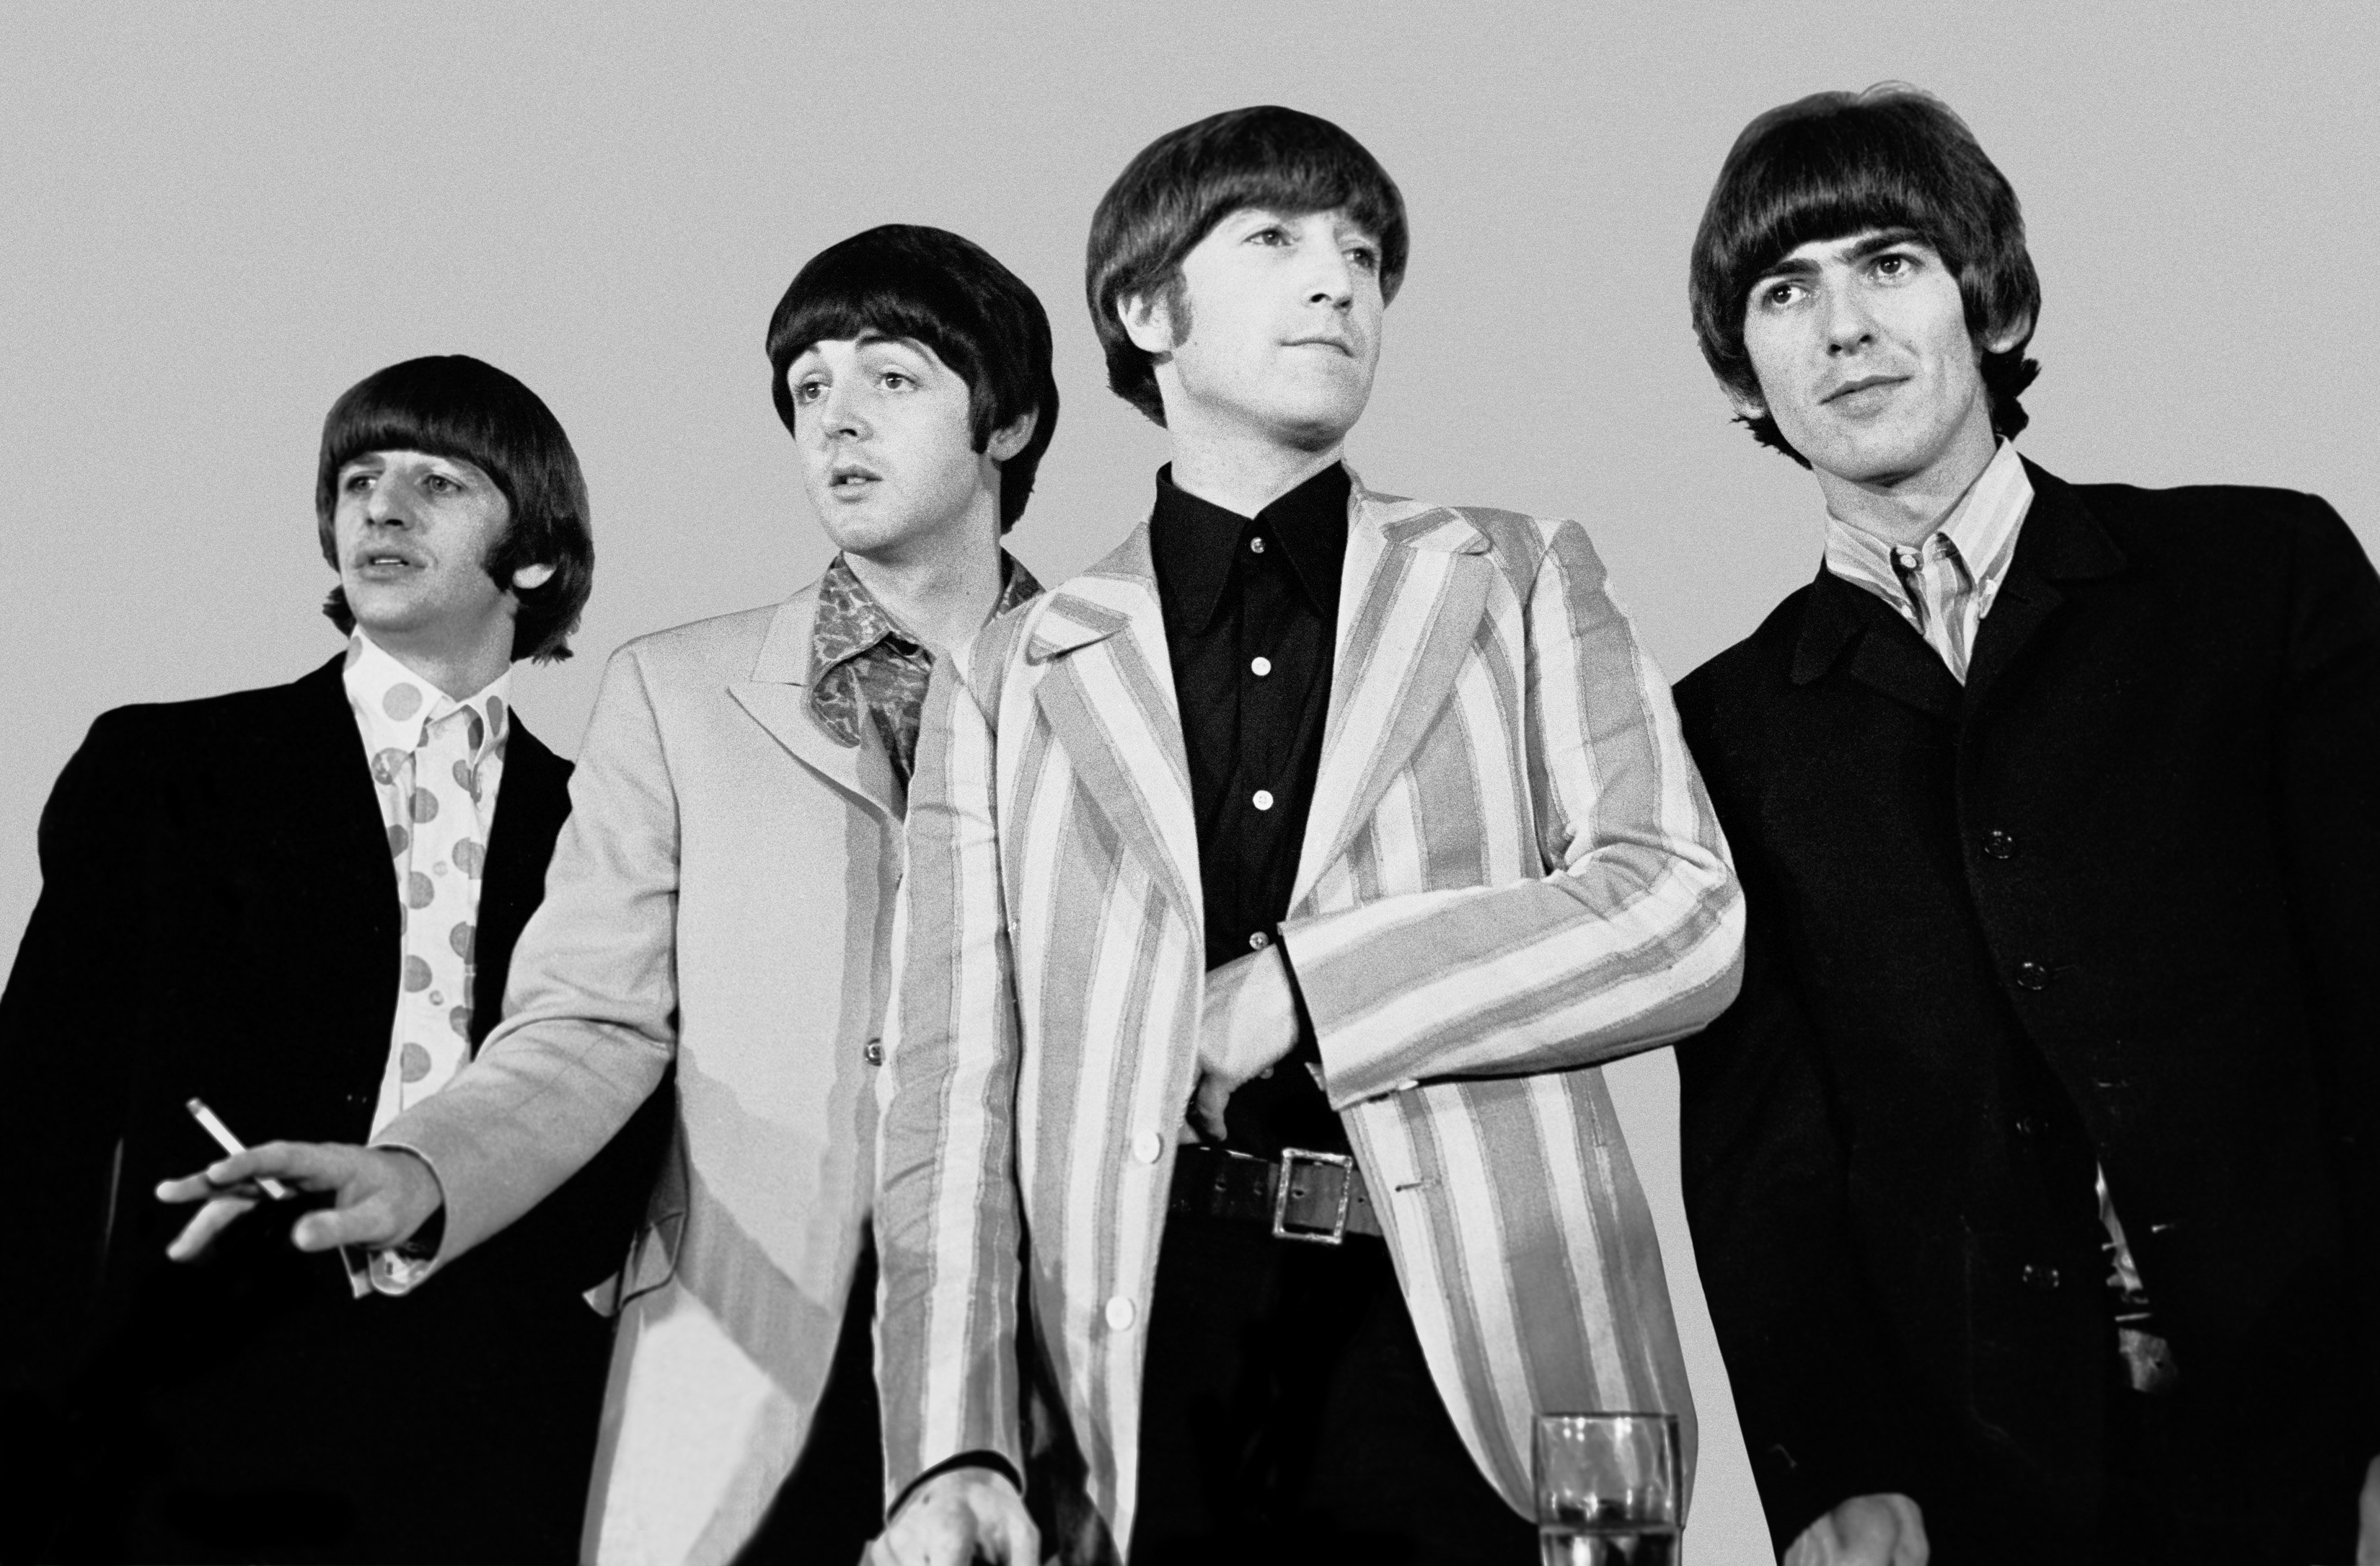 the beatles wallpaper,black and white,event,monochrome,photography,suit